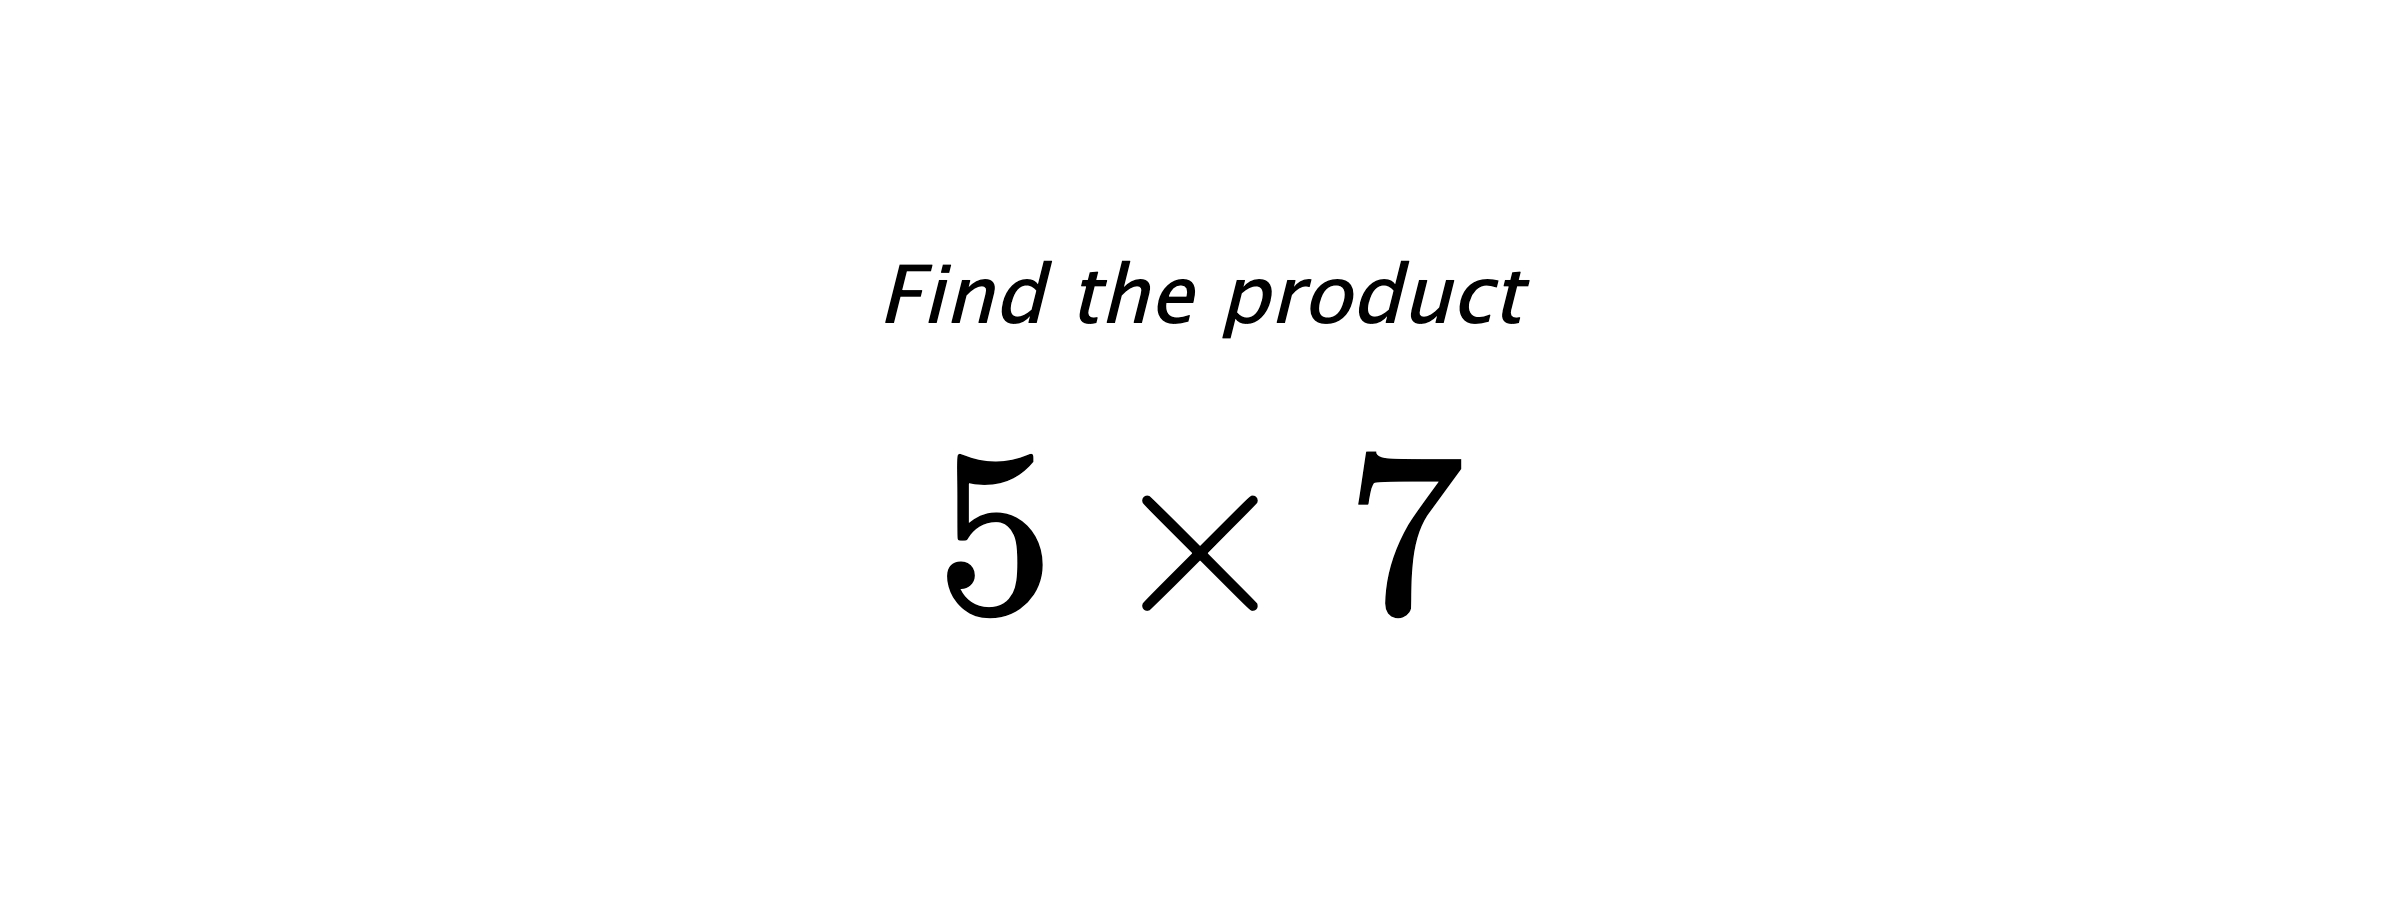 Find the product $ 5 \times 7 $